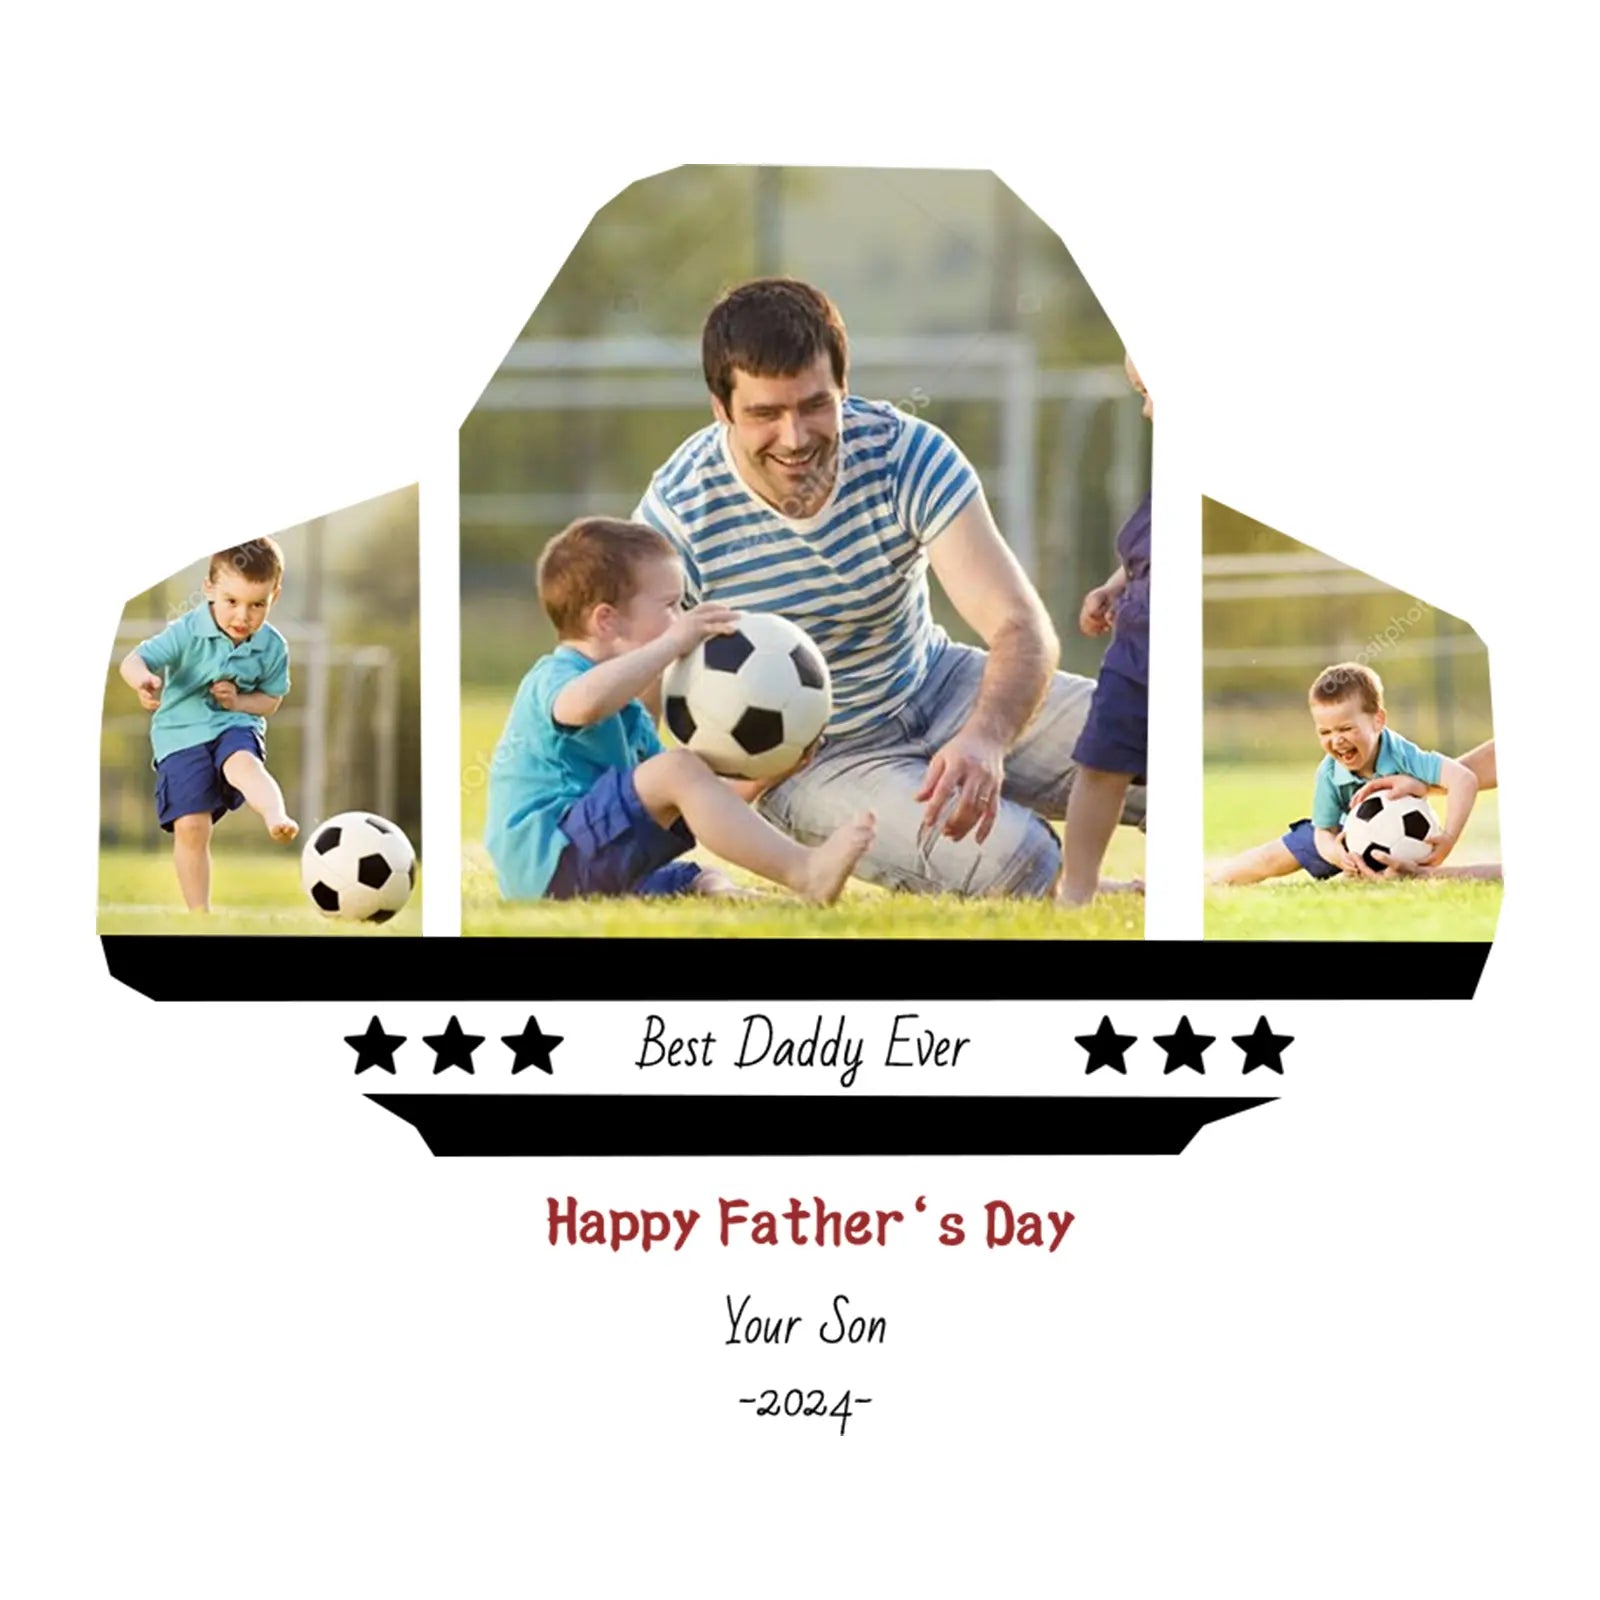 Personalized Custom Photo Soccer Ball Gifts For Dad,Grandpa,Son,Grandson - Family Watchs